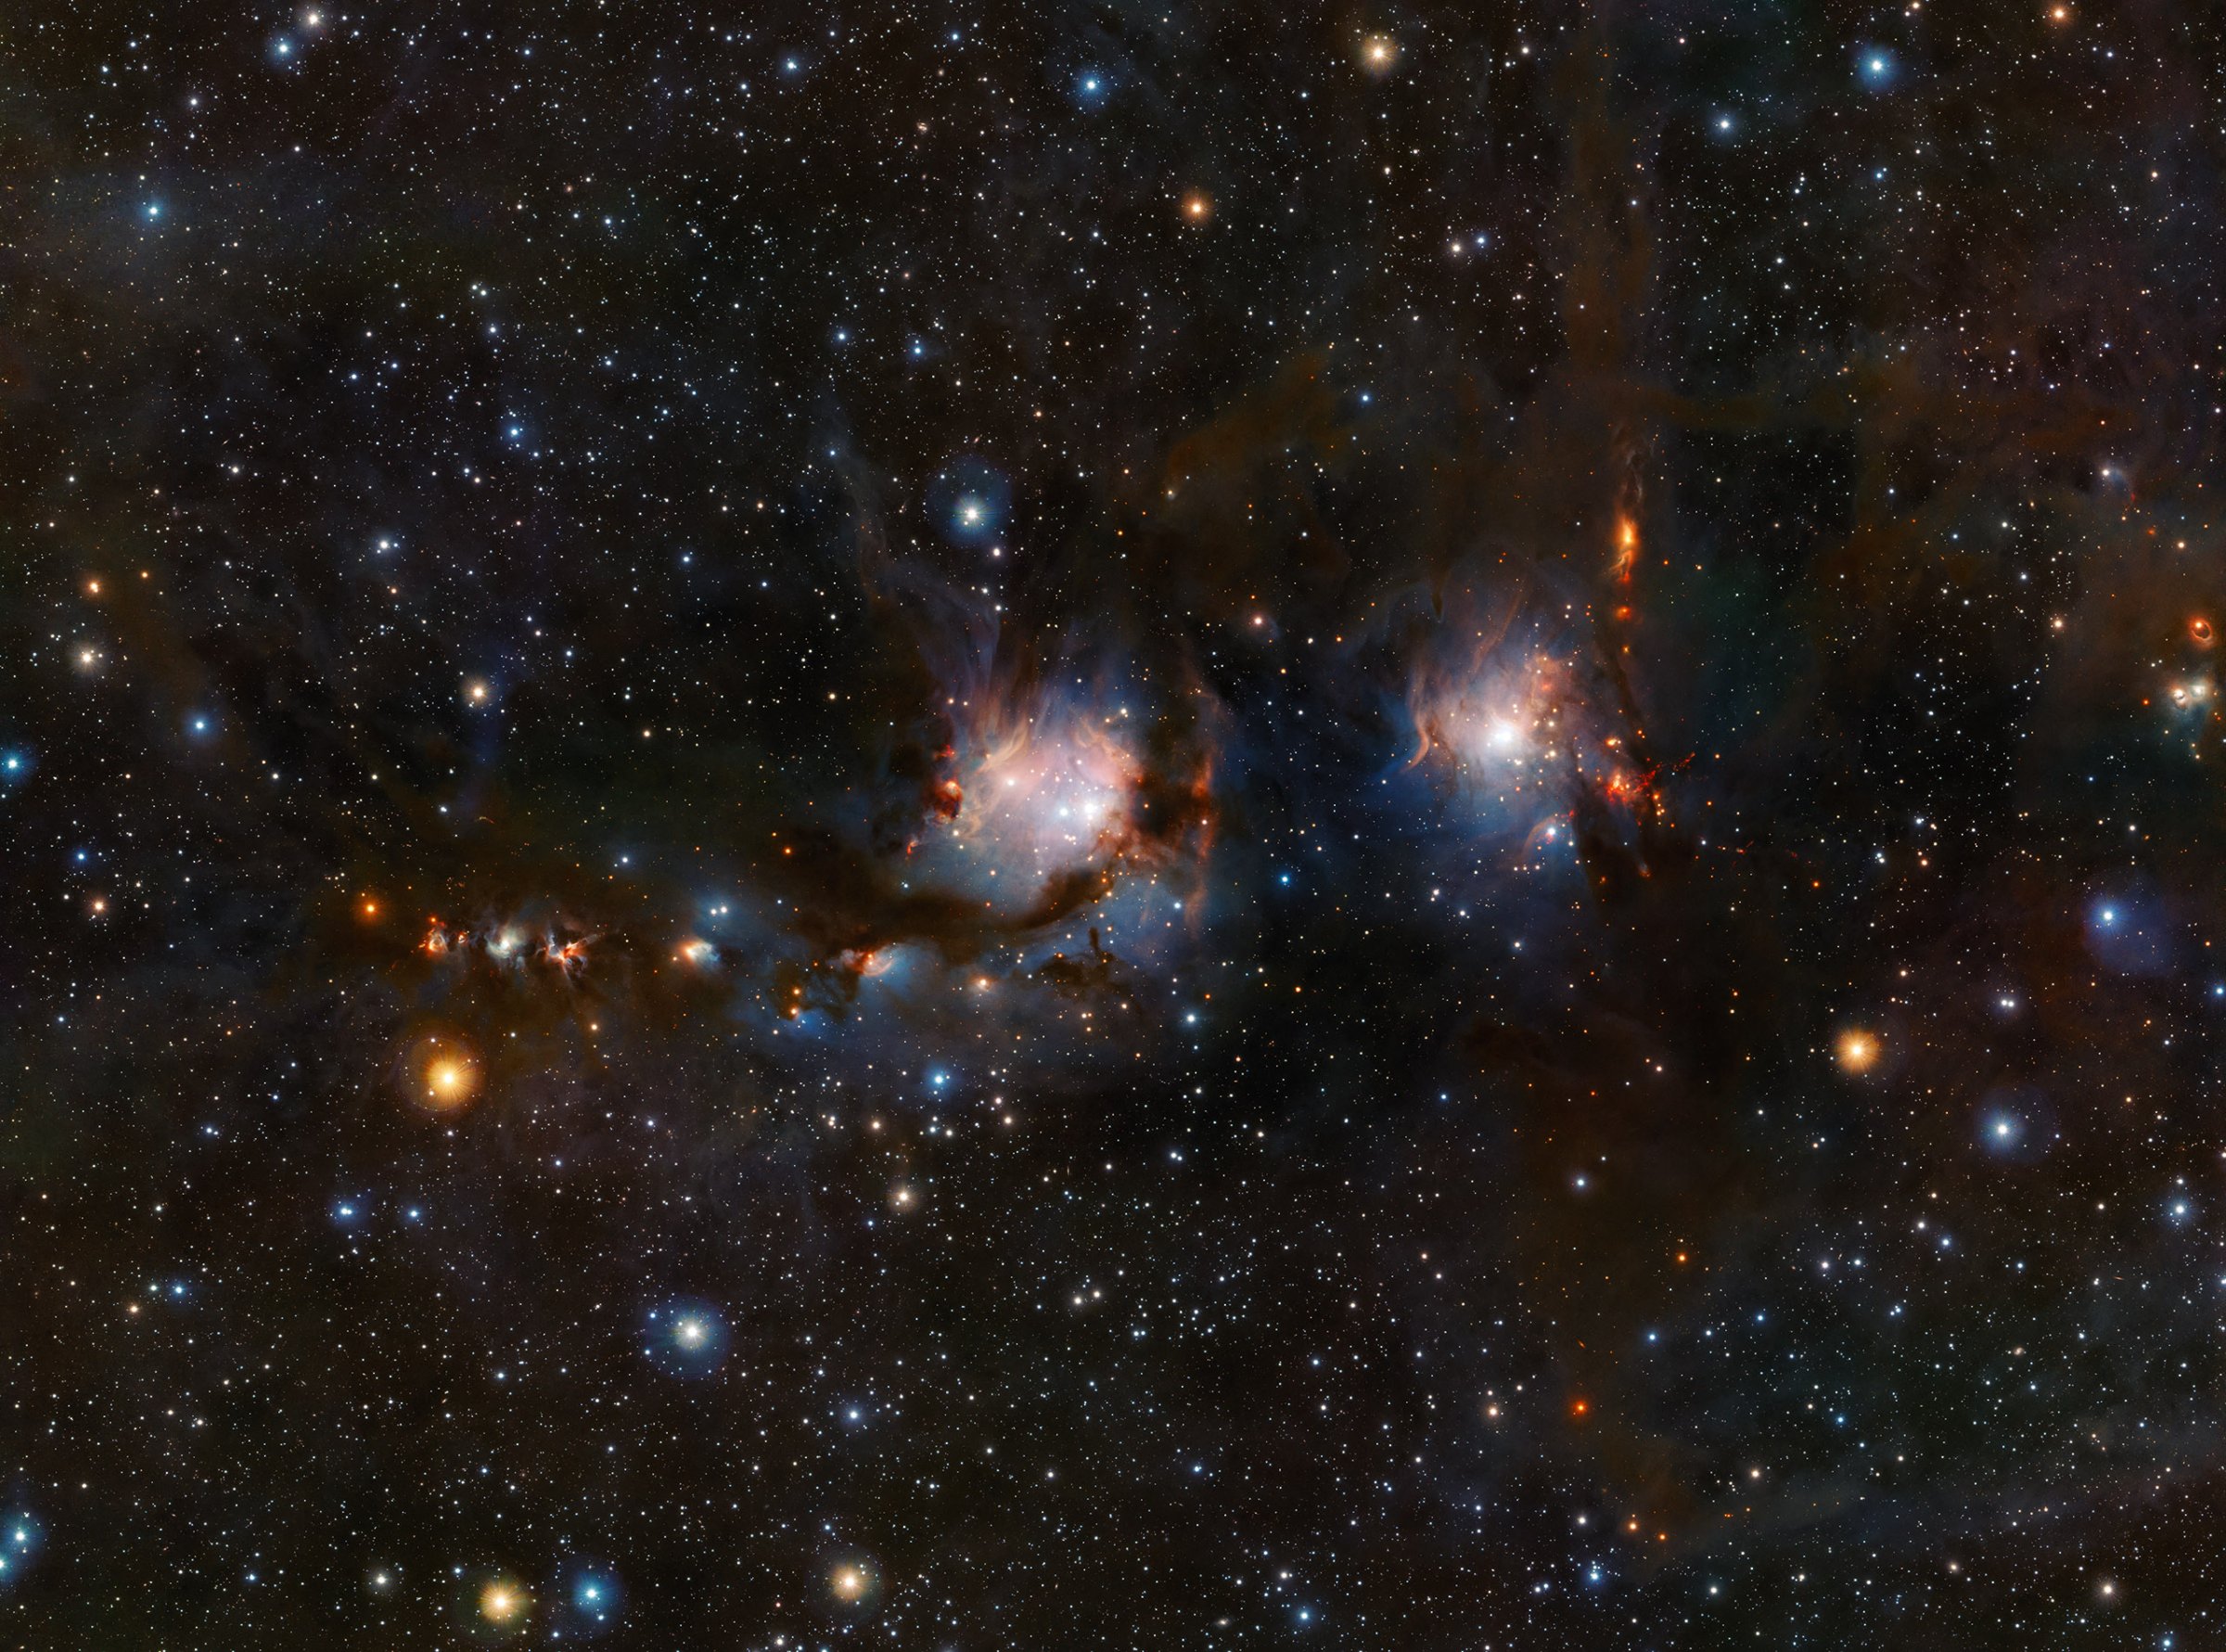 The star formation region, Messier 78, in the constellation of Orion (The Hunter), was taken with the VISTA infrared survey telescope at ESO’s Paranal Observatory in Chile and released on Oct. 5, 2016.